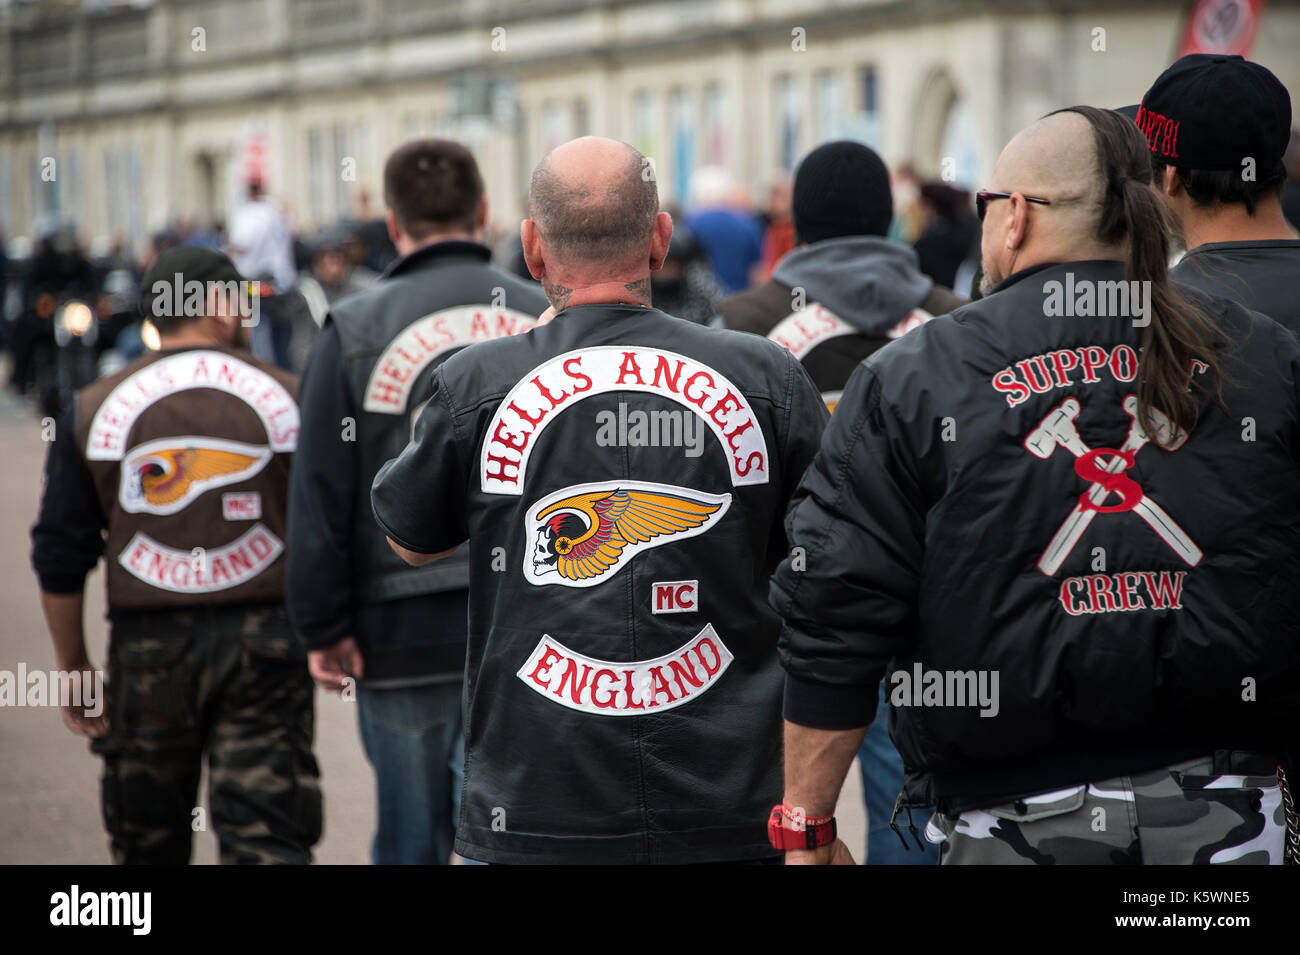 Ace Cafe Reunion 2017 Brighton Burn-Up, Thousands of bikers Descended ...